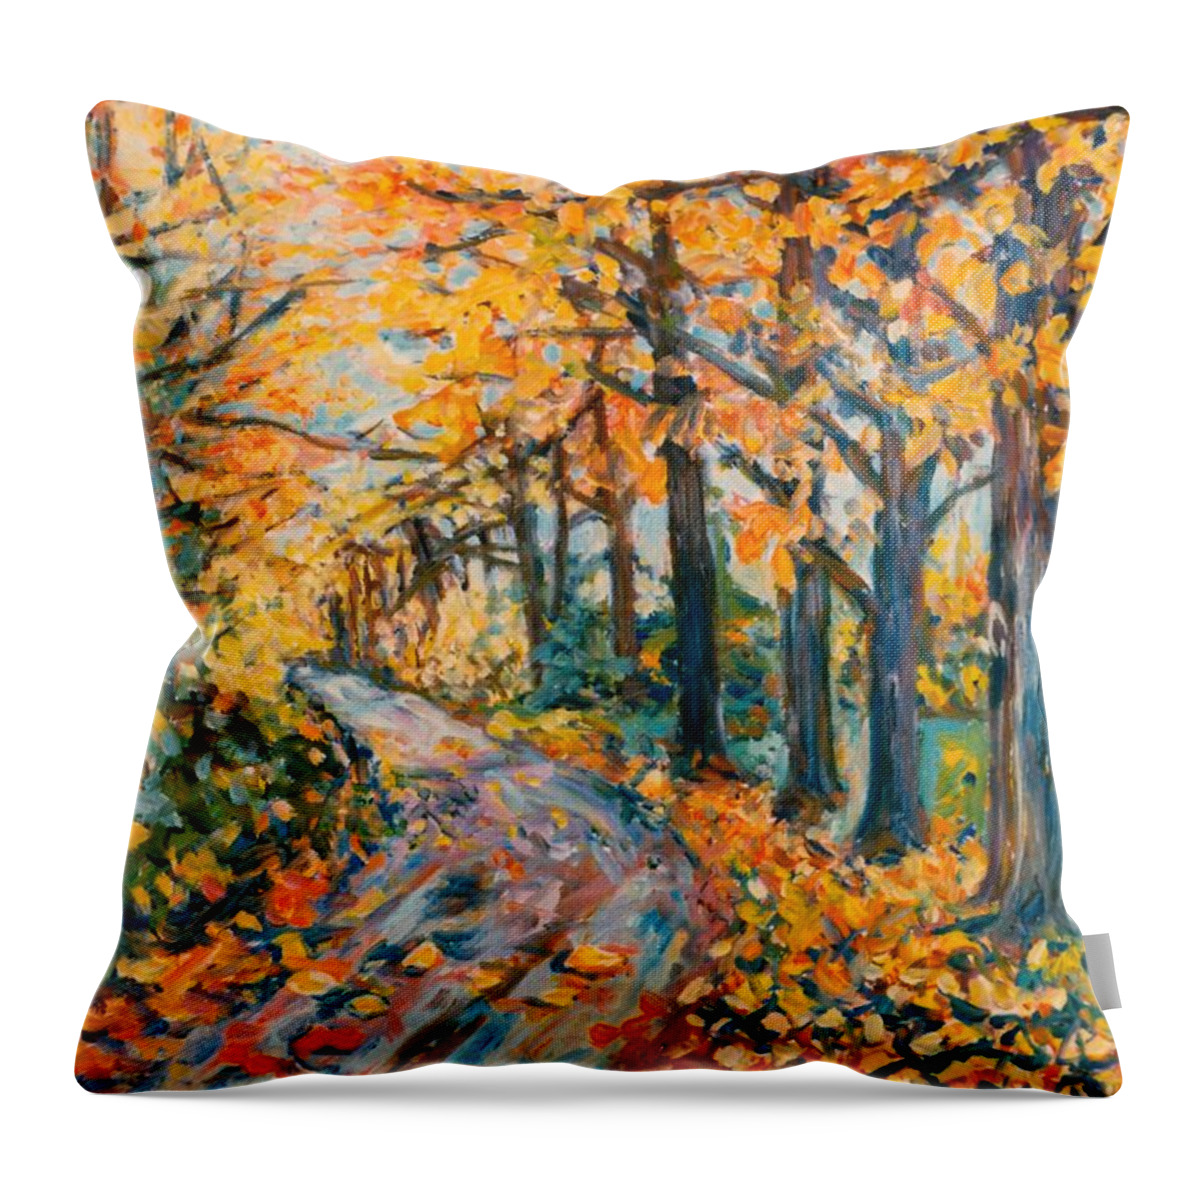 Autumn Throw Pillow featuring the painting Autumn Road by Kendall Kessler